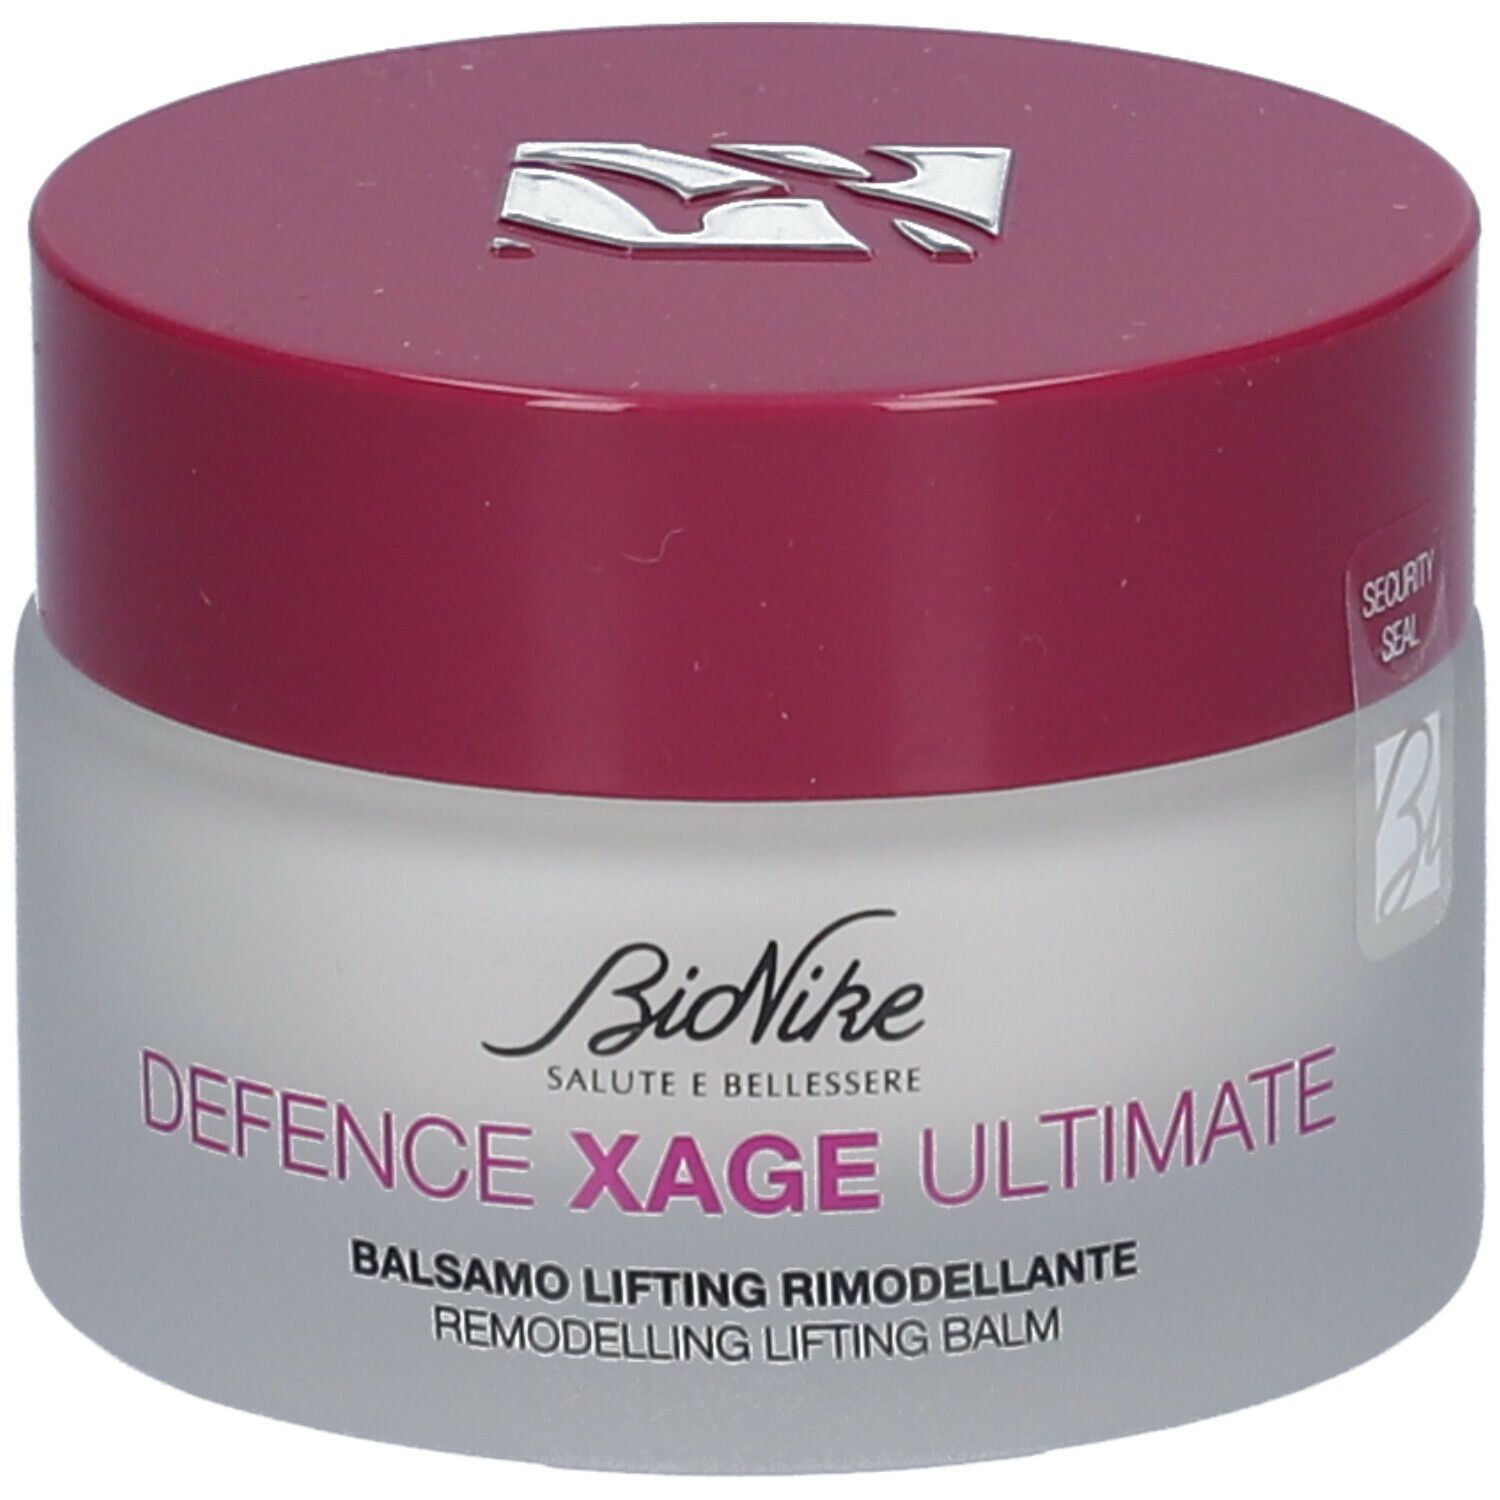 BioNike Defence Xage Ultimate Baume Lifting Remodelant